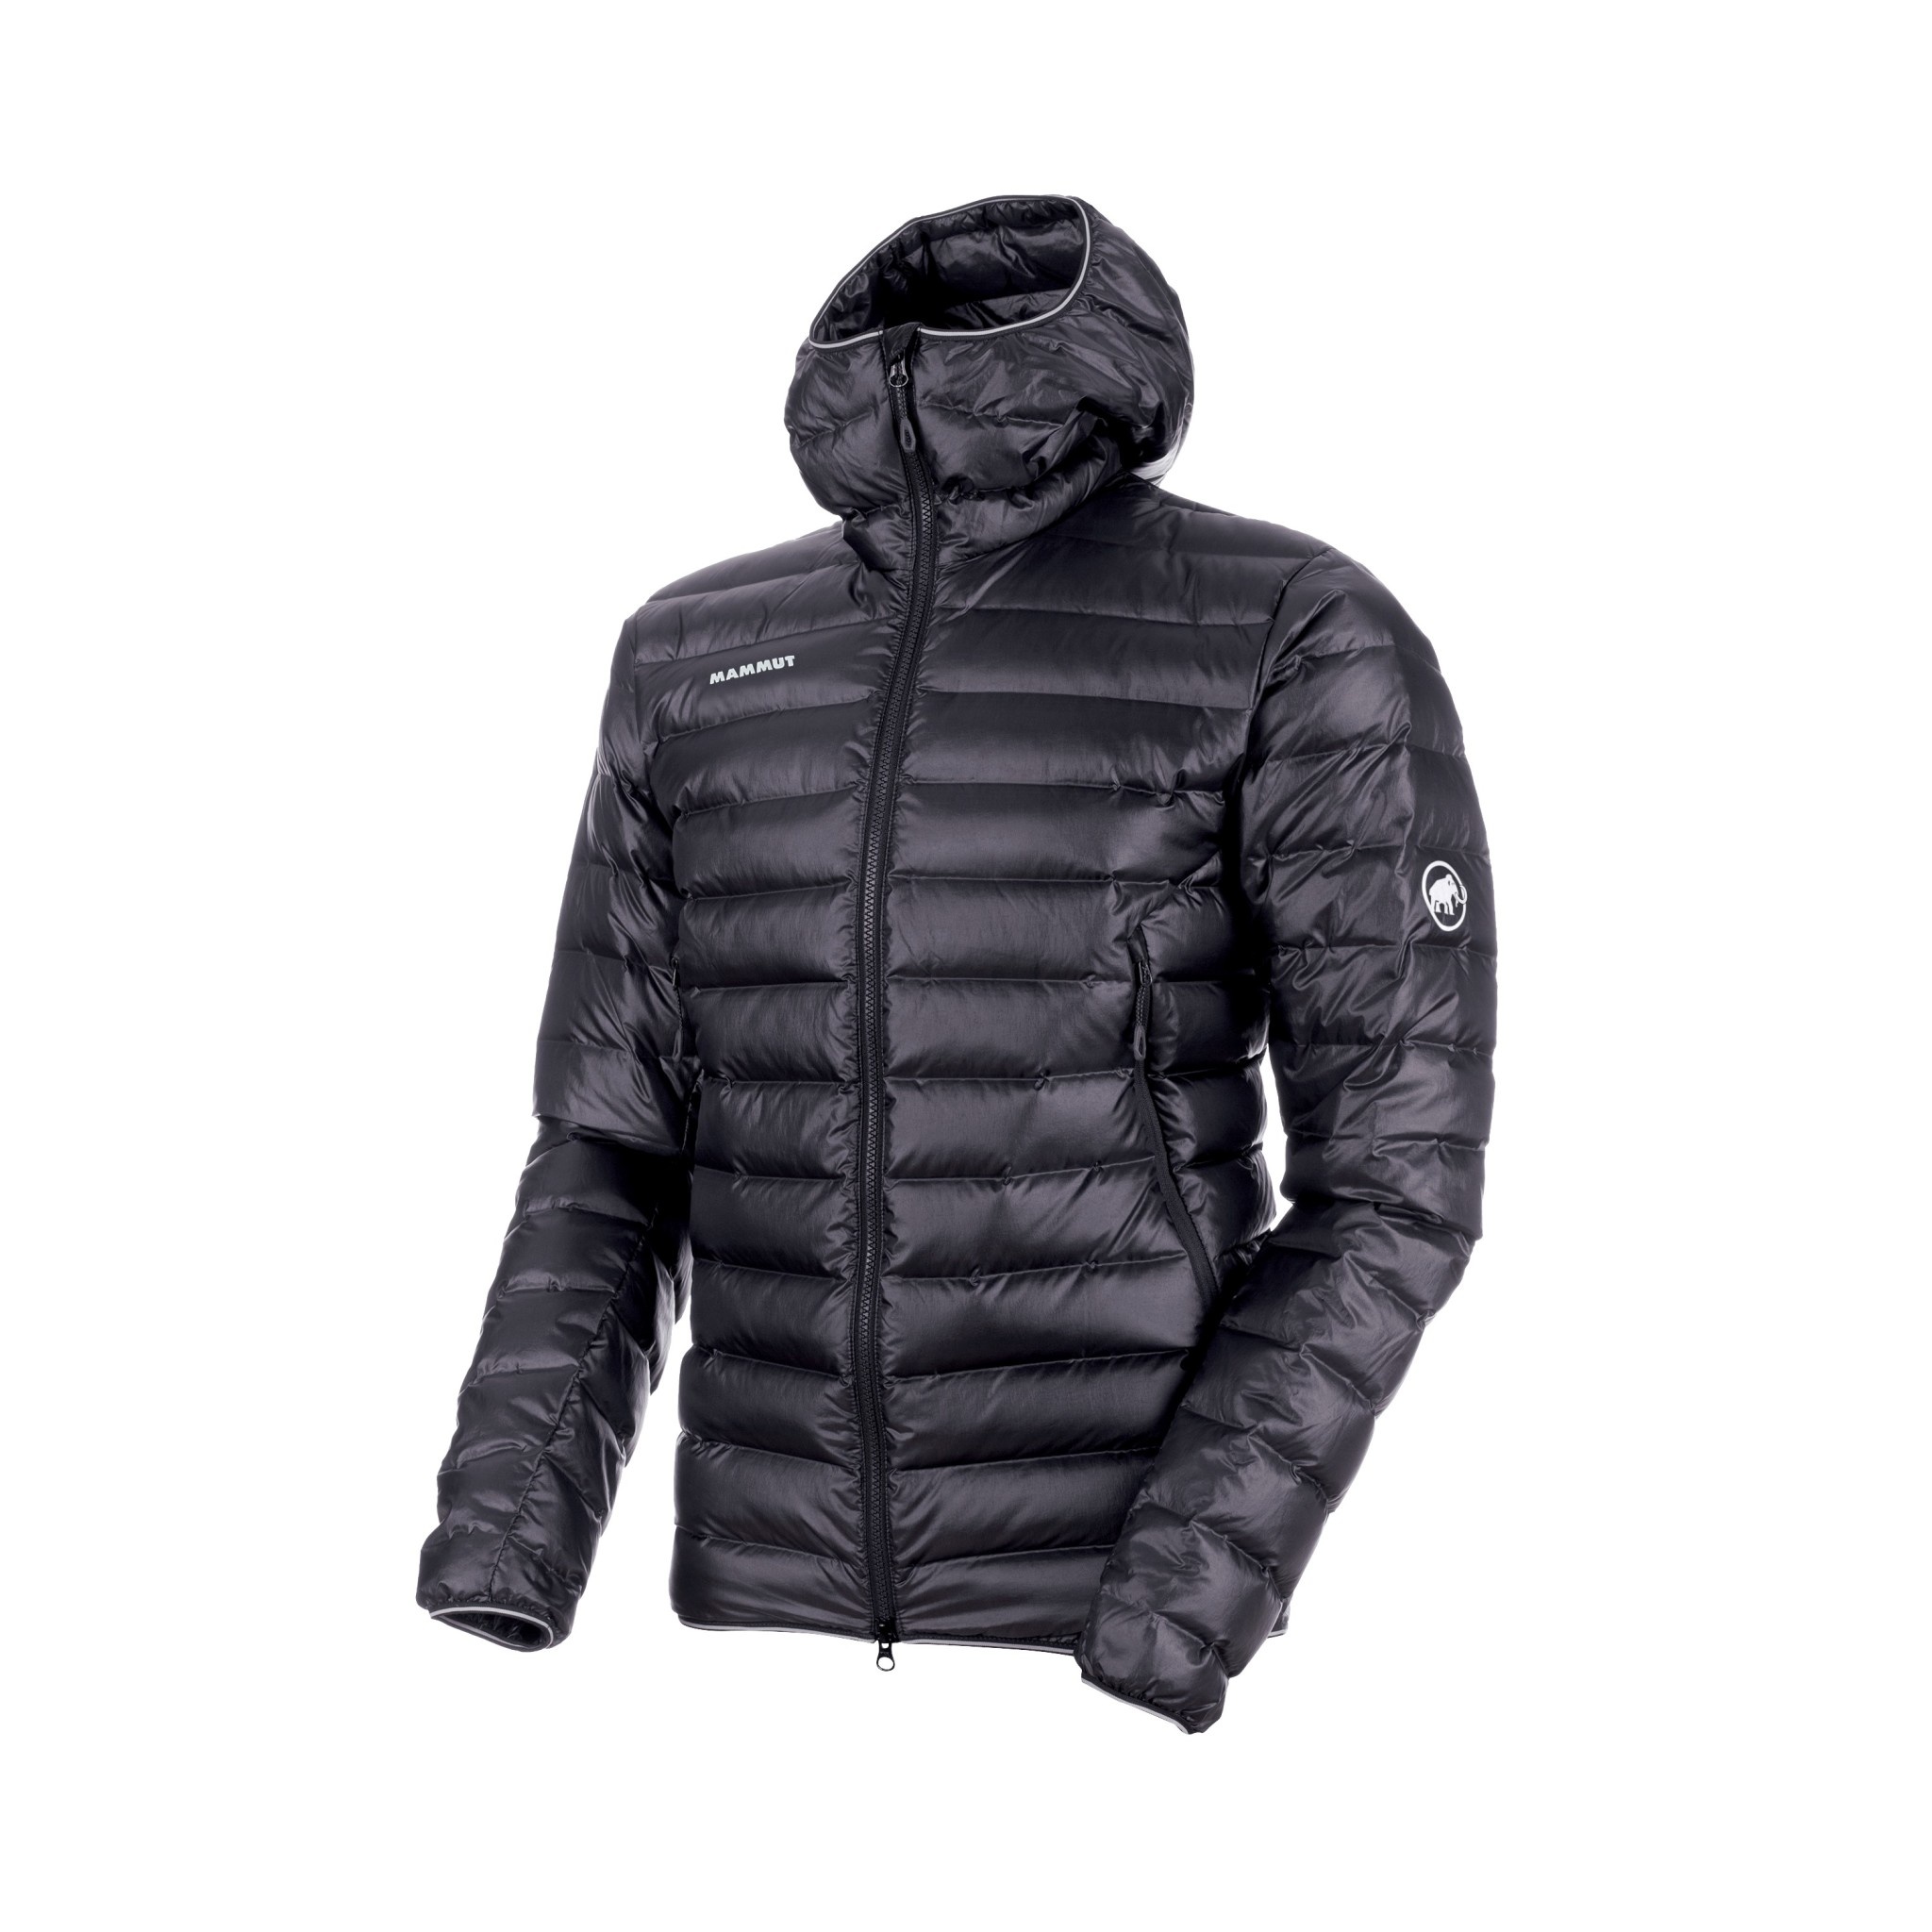 Broad IN Jacket - The BackCountry